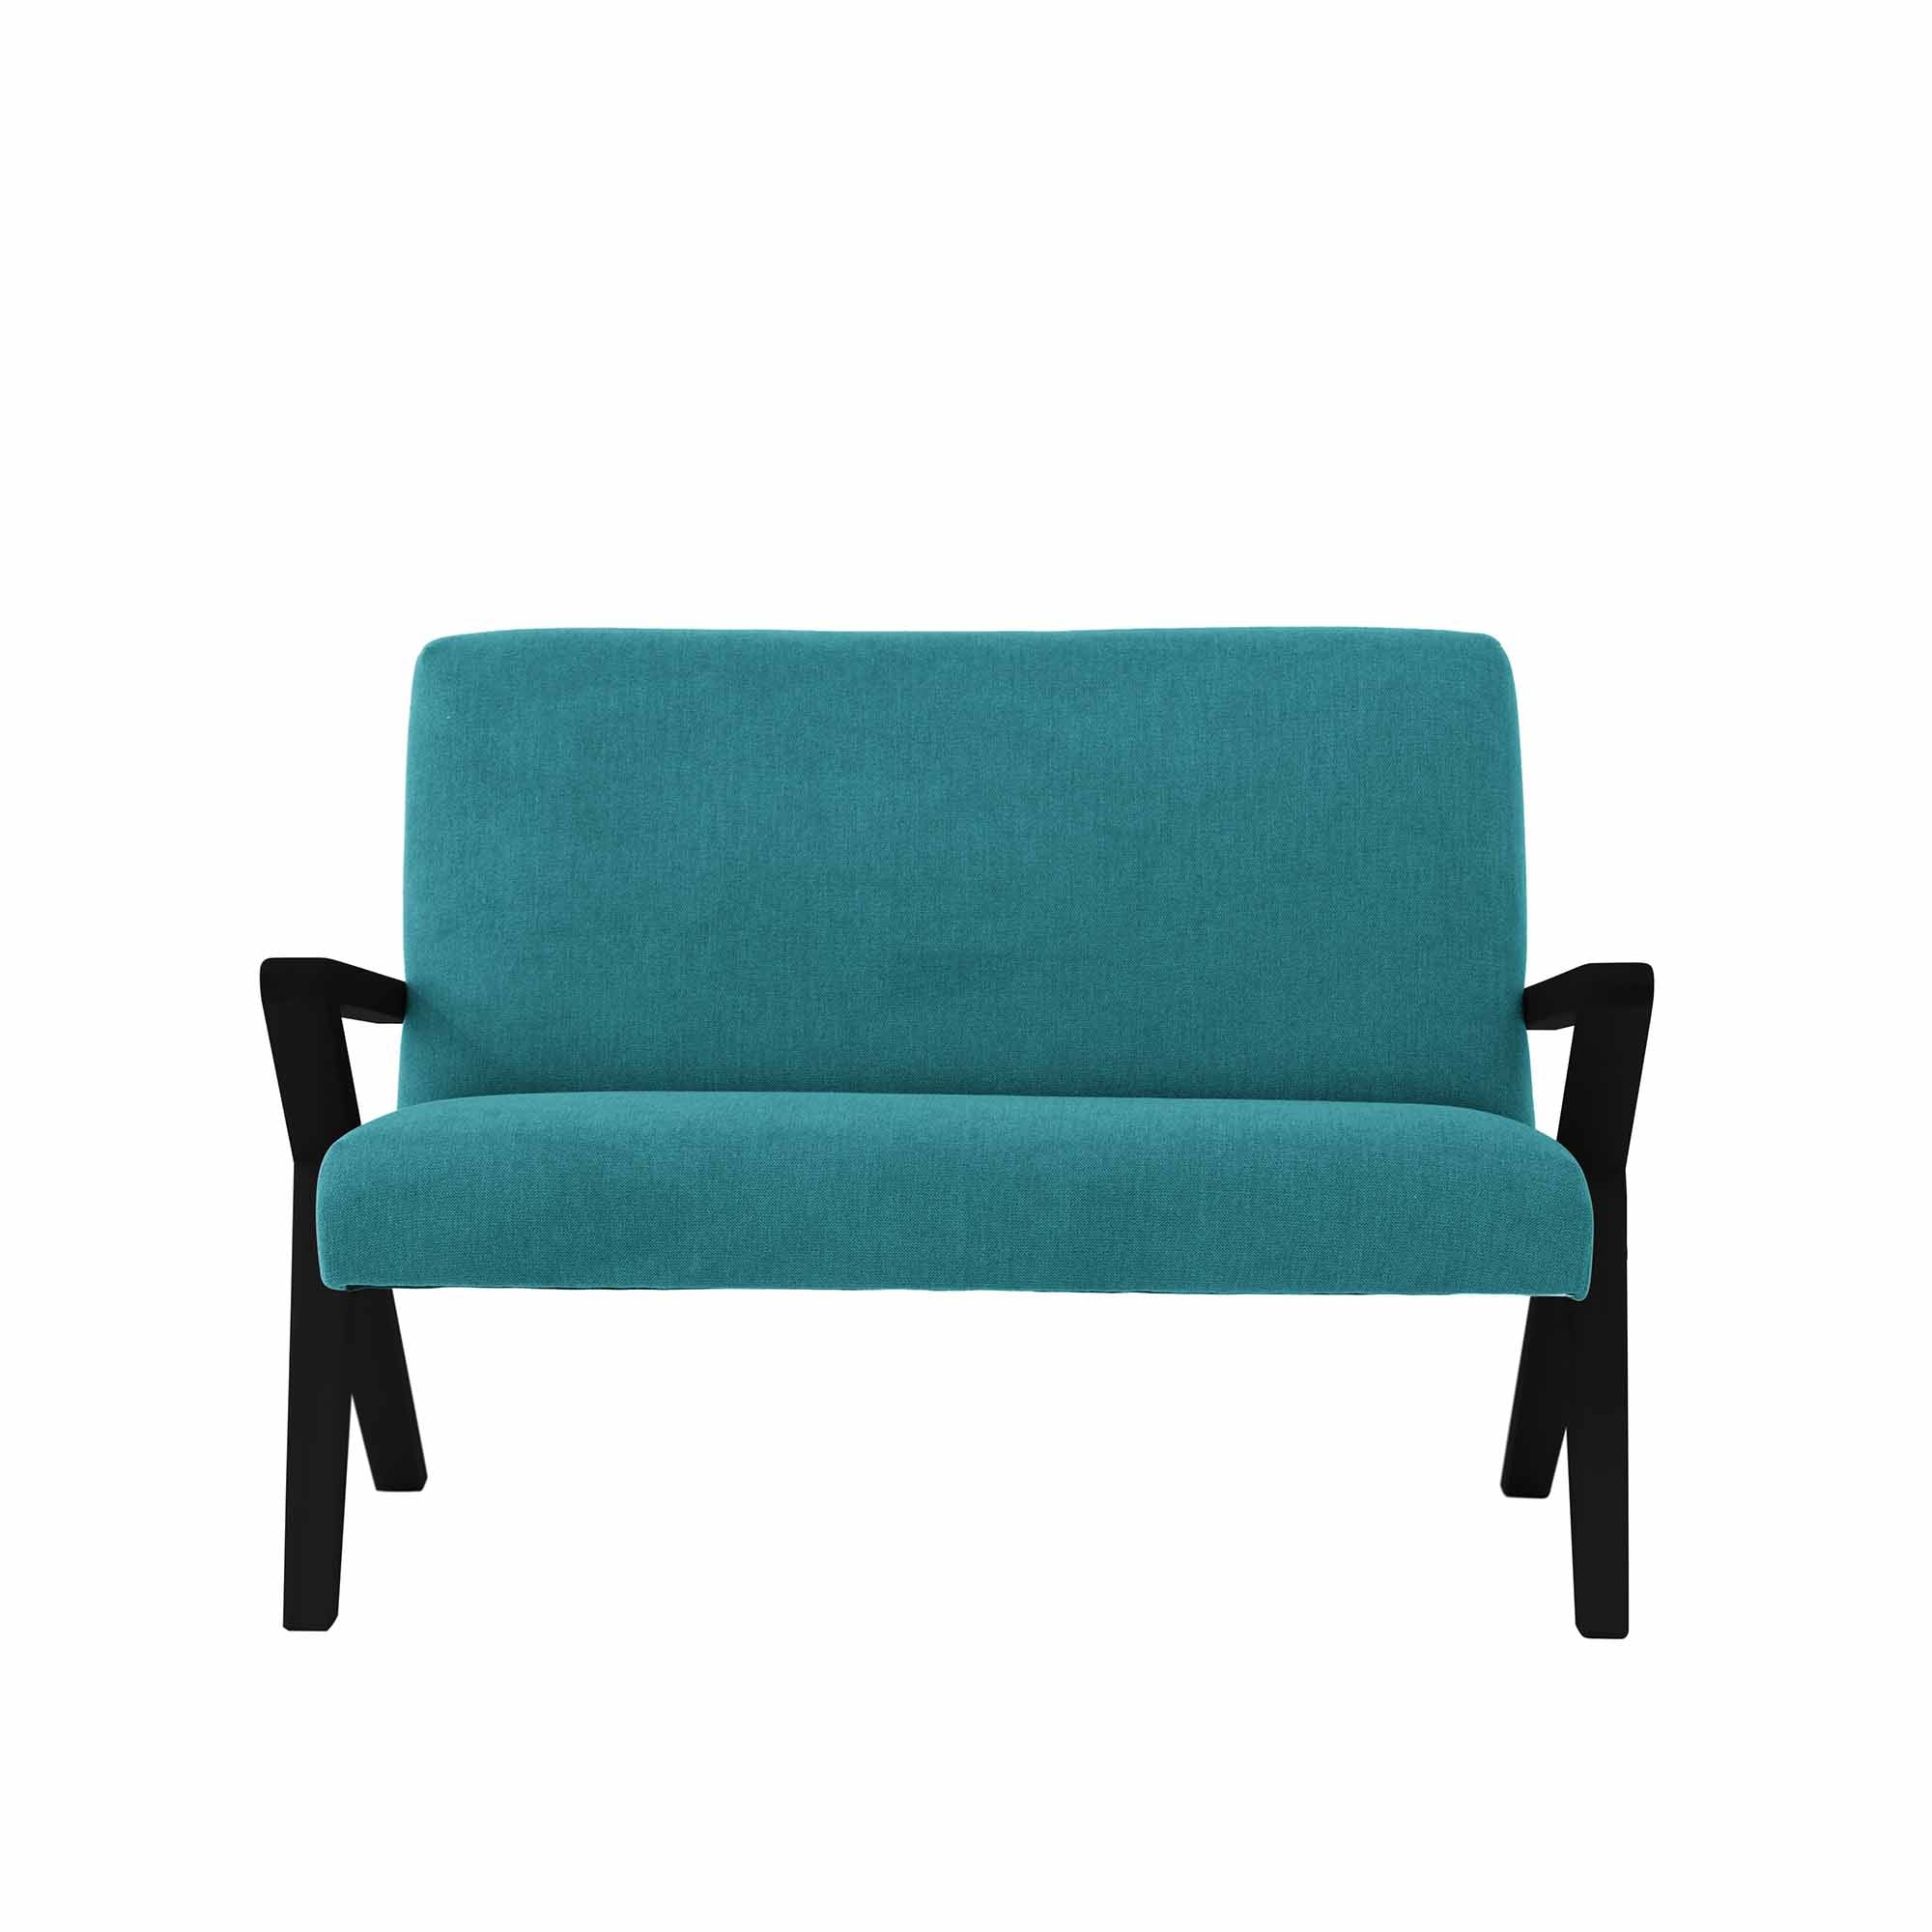  2-Seater Sofa, Beech Wood Frame, Black Lacquered blue fabric, front view